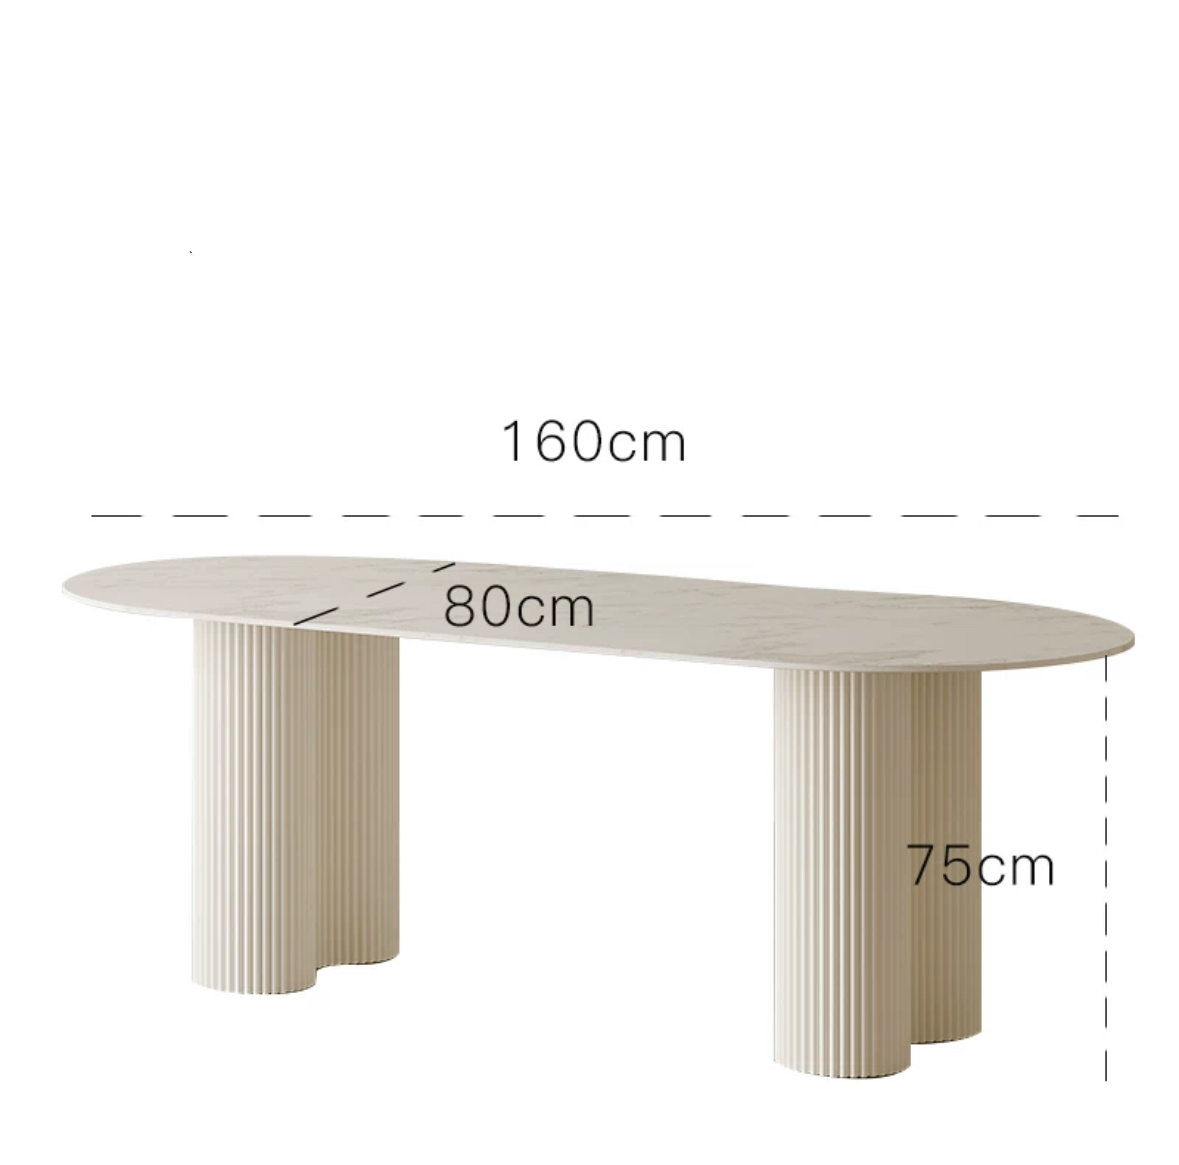 White Cream Marble Oval Dining Table